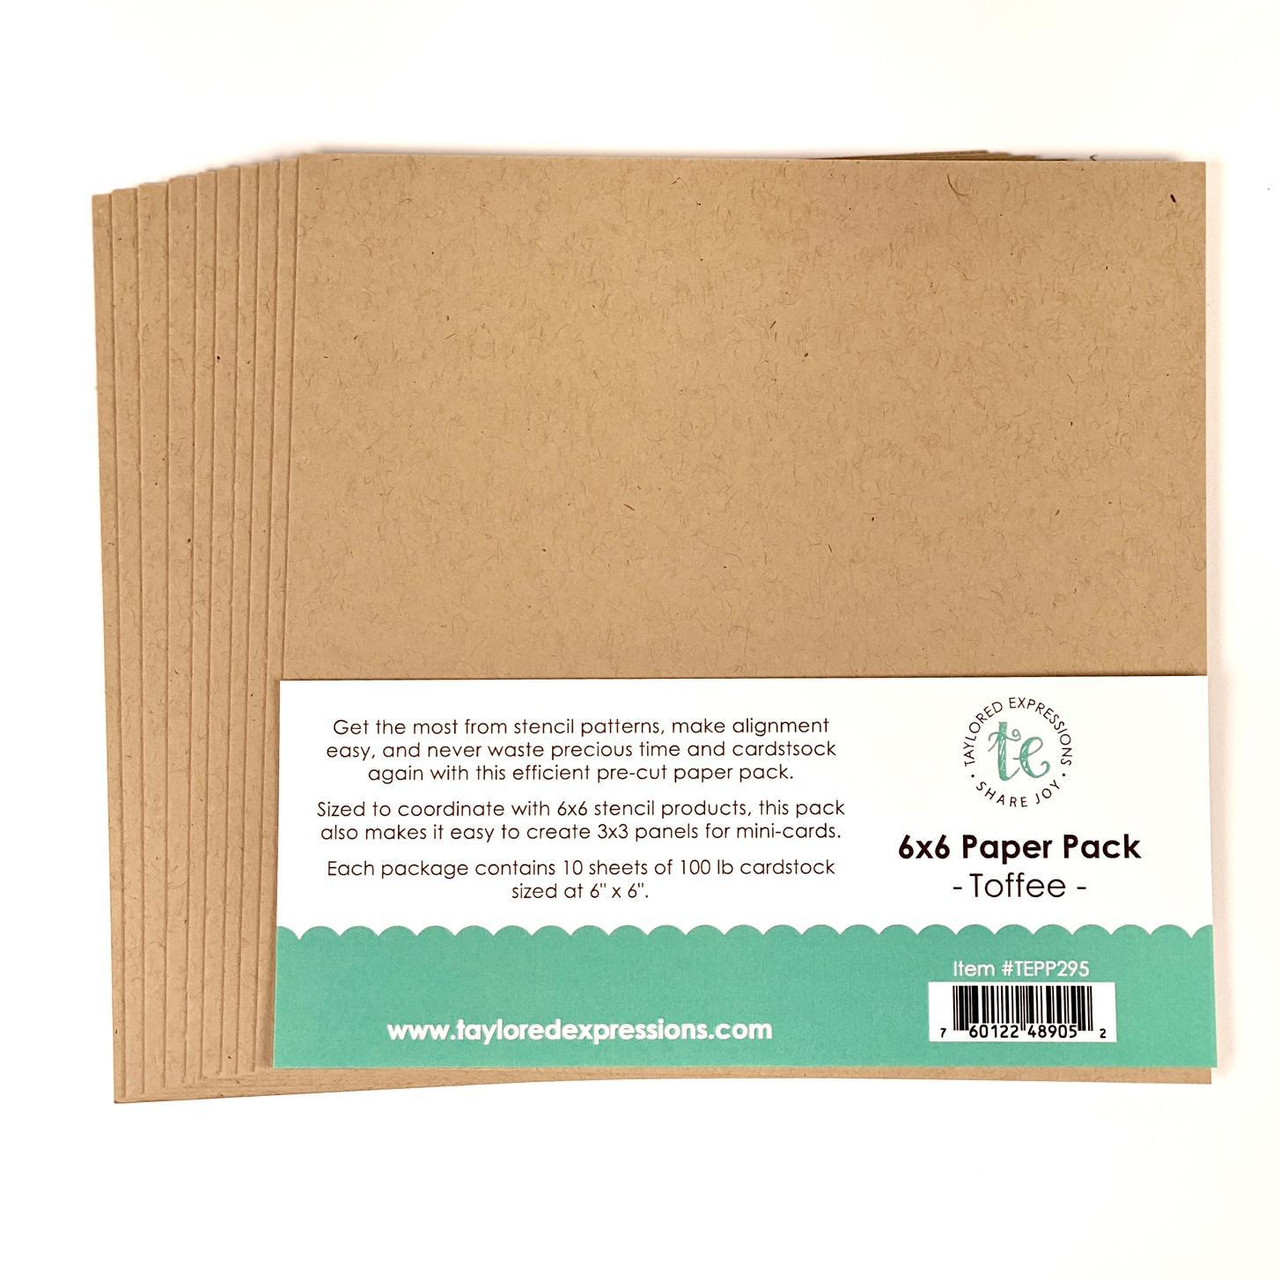 6 x 6 Paper Pack Toffee